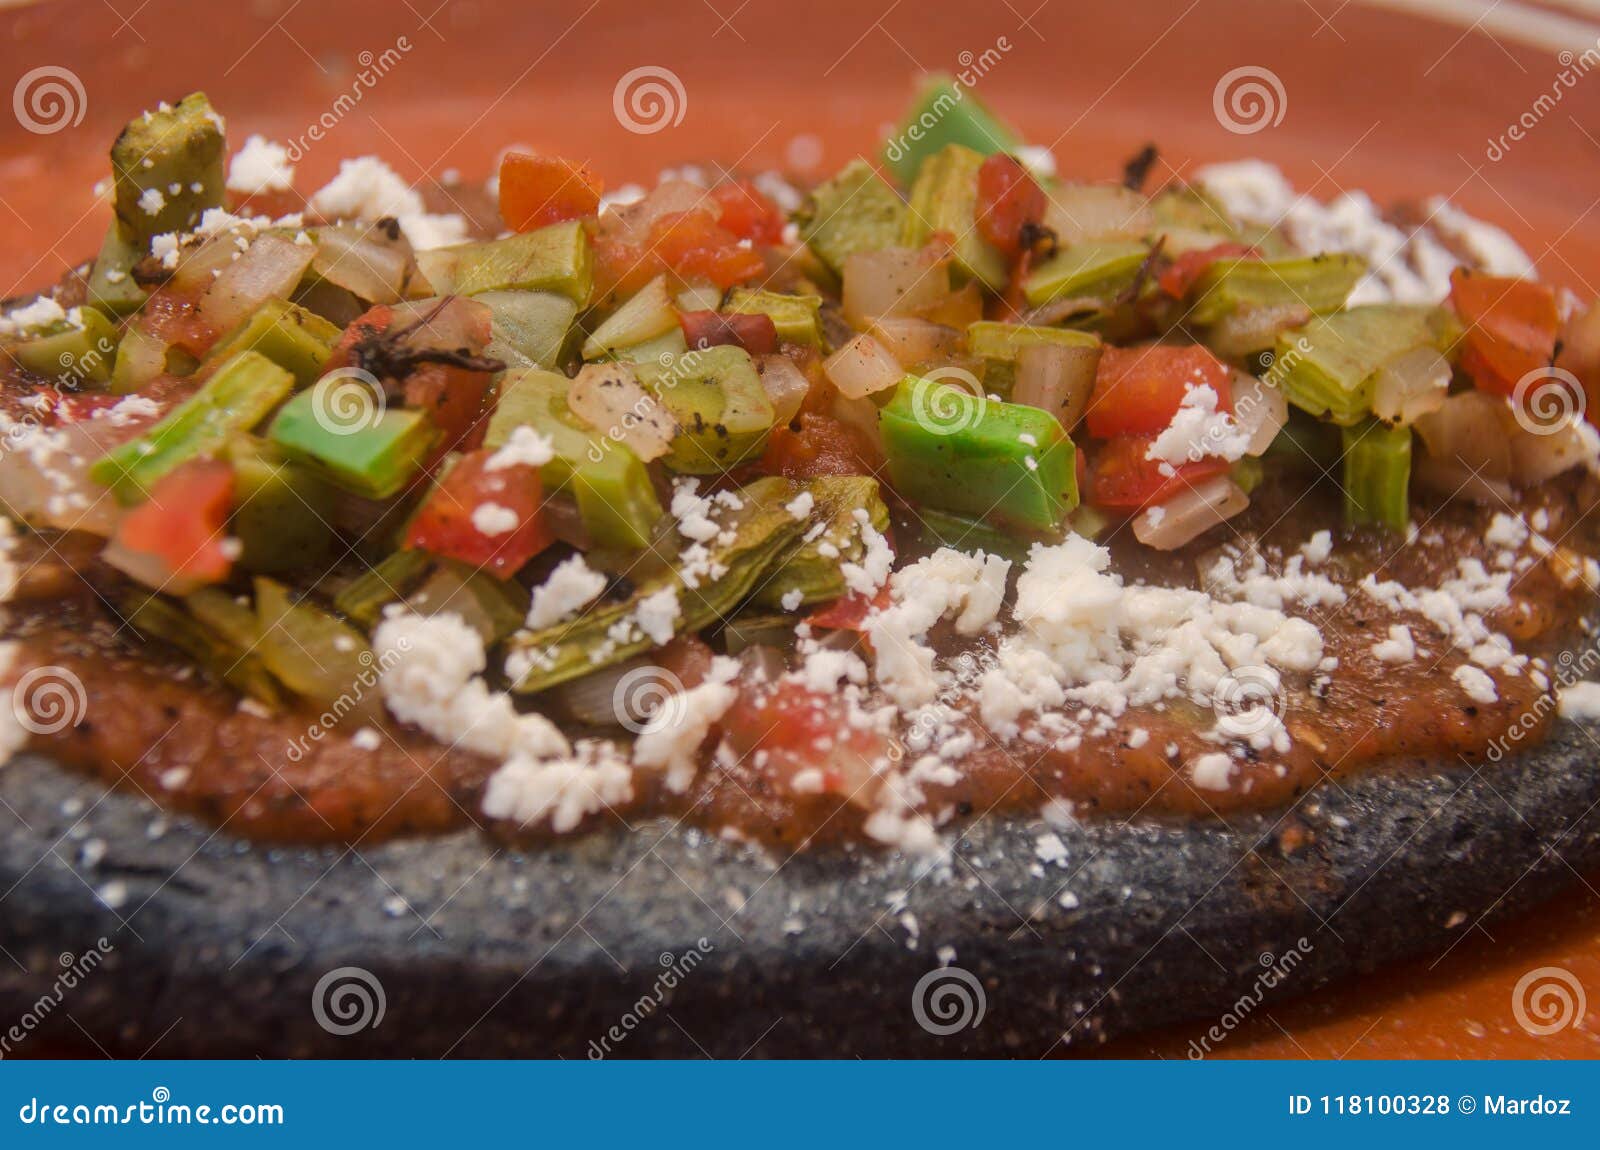 traditional mexican sope with nopales